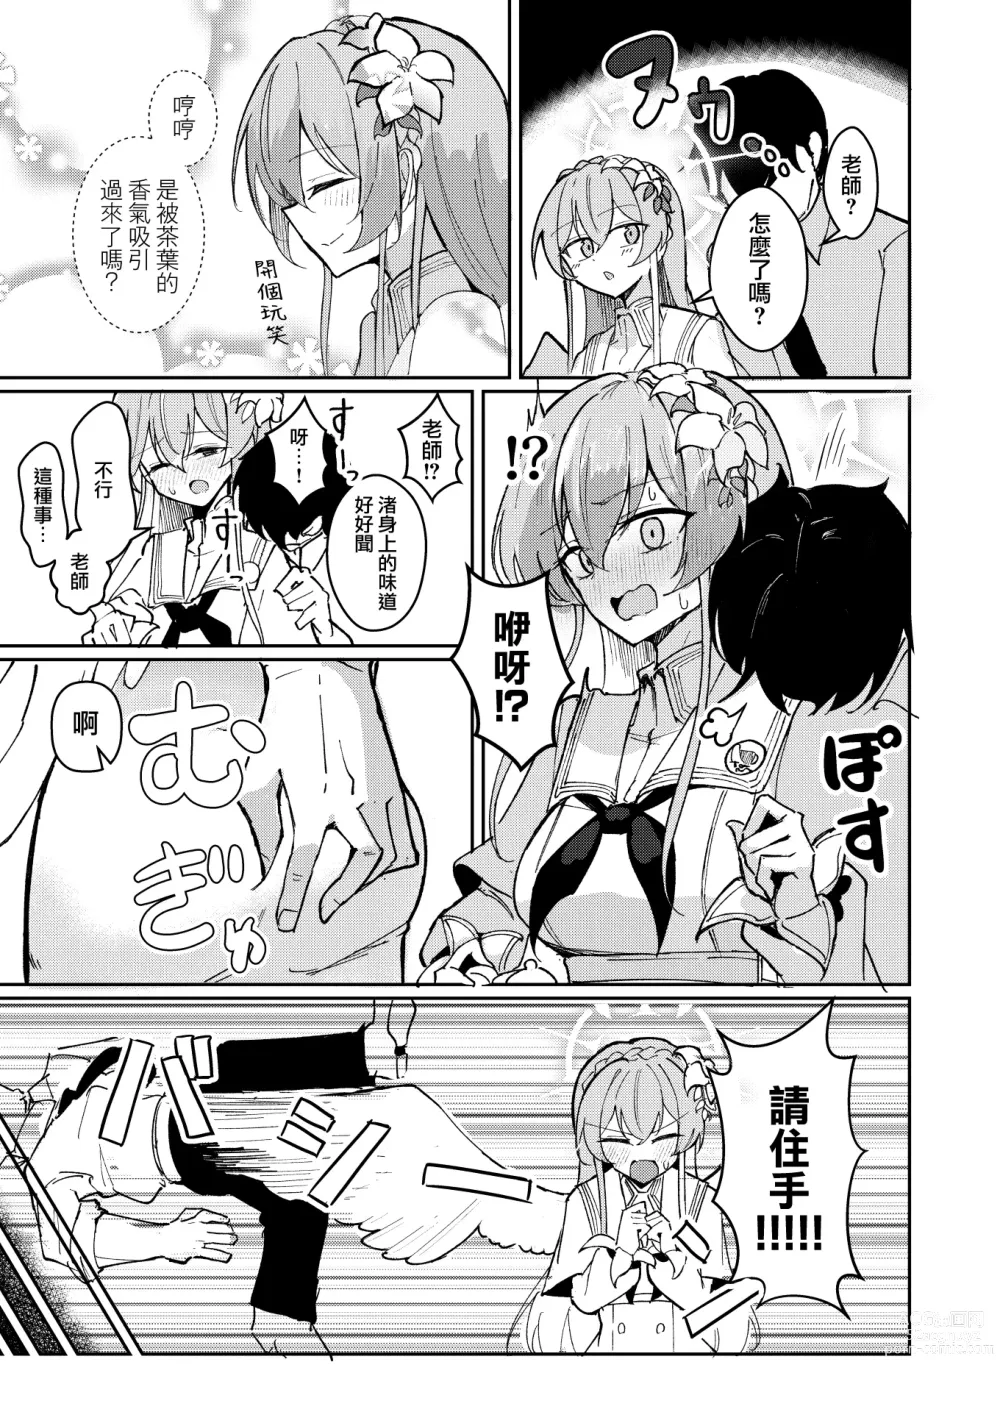 Page 6 of doujinshi 情欲羽翼下的學生會